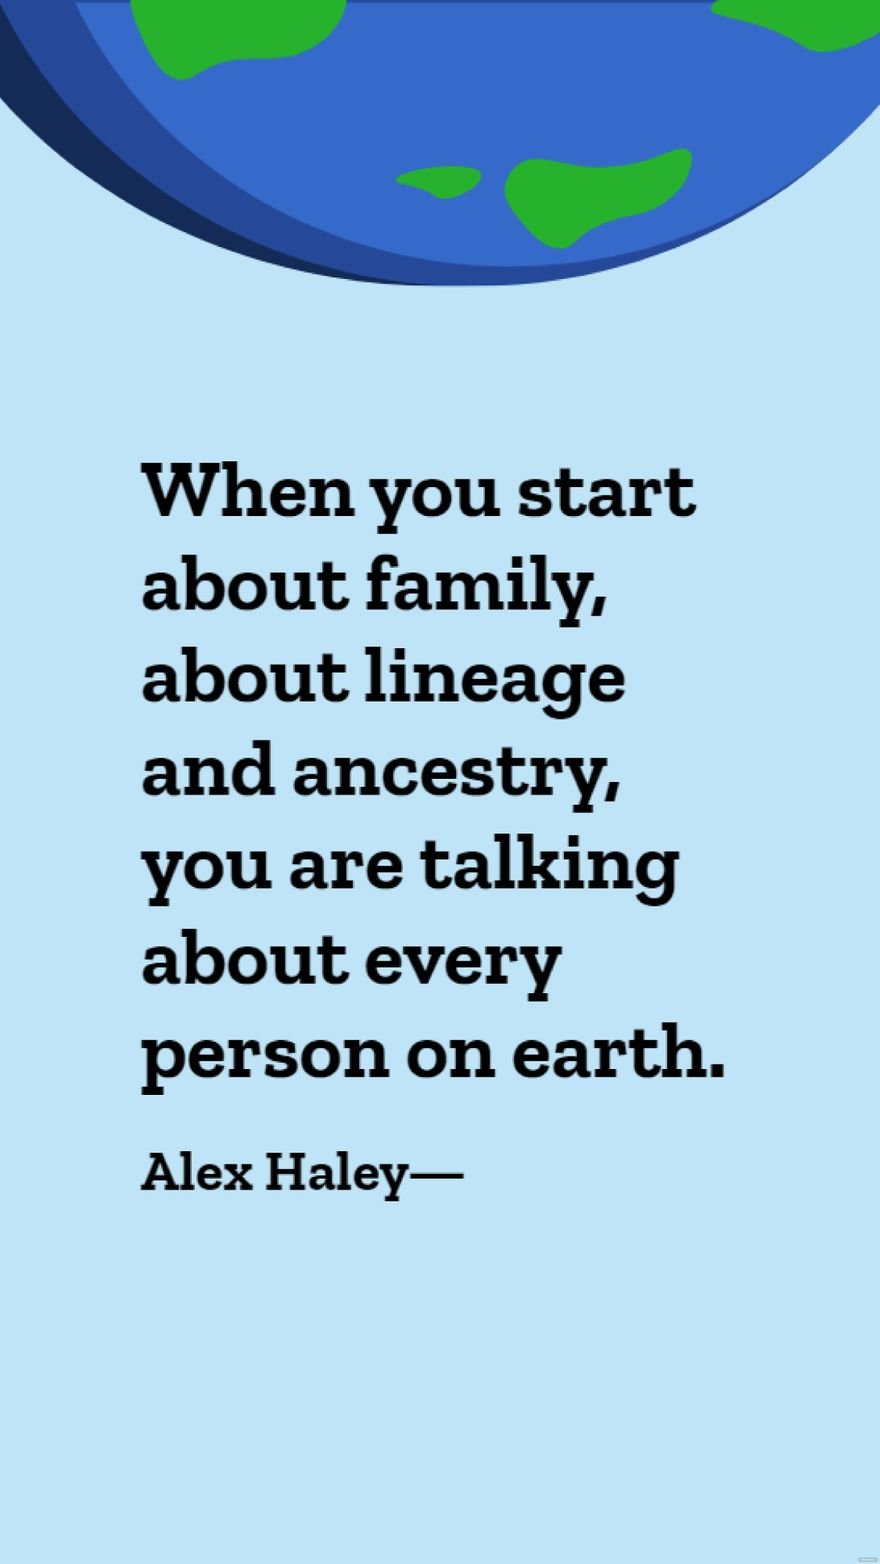 Free Alex Haley - When you start about family, about lineage and ancestry, you are talking about every person on earth. in JPG